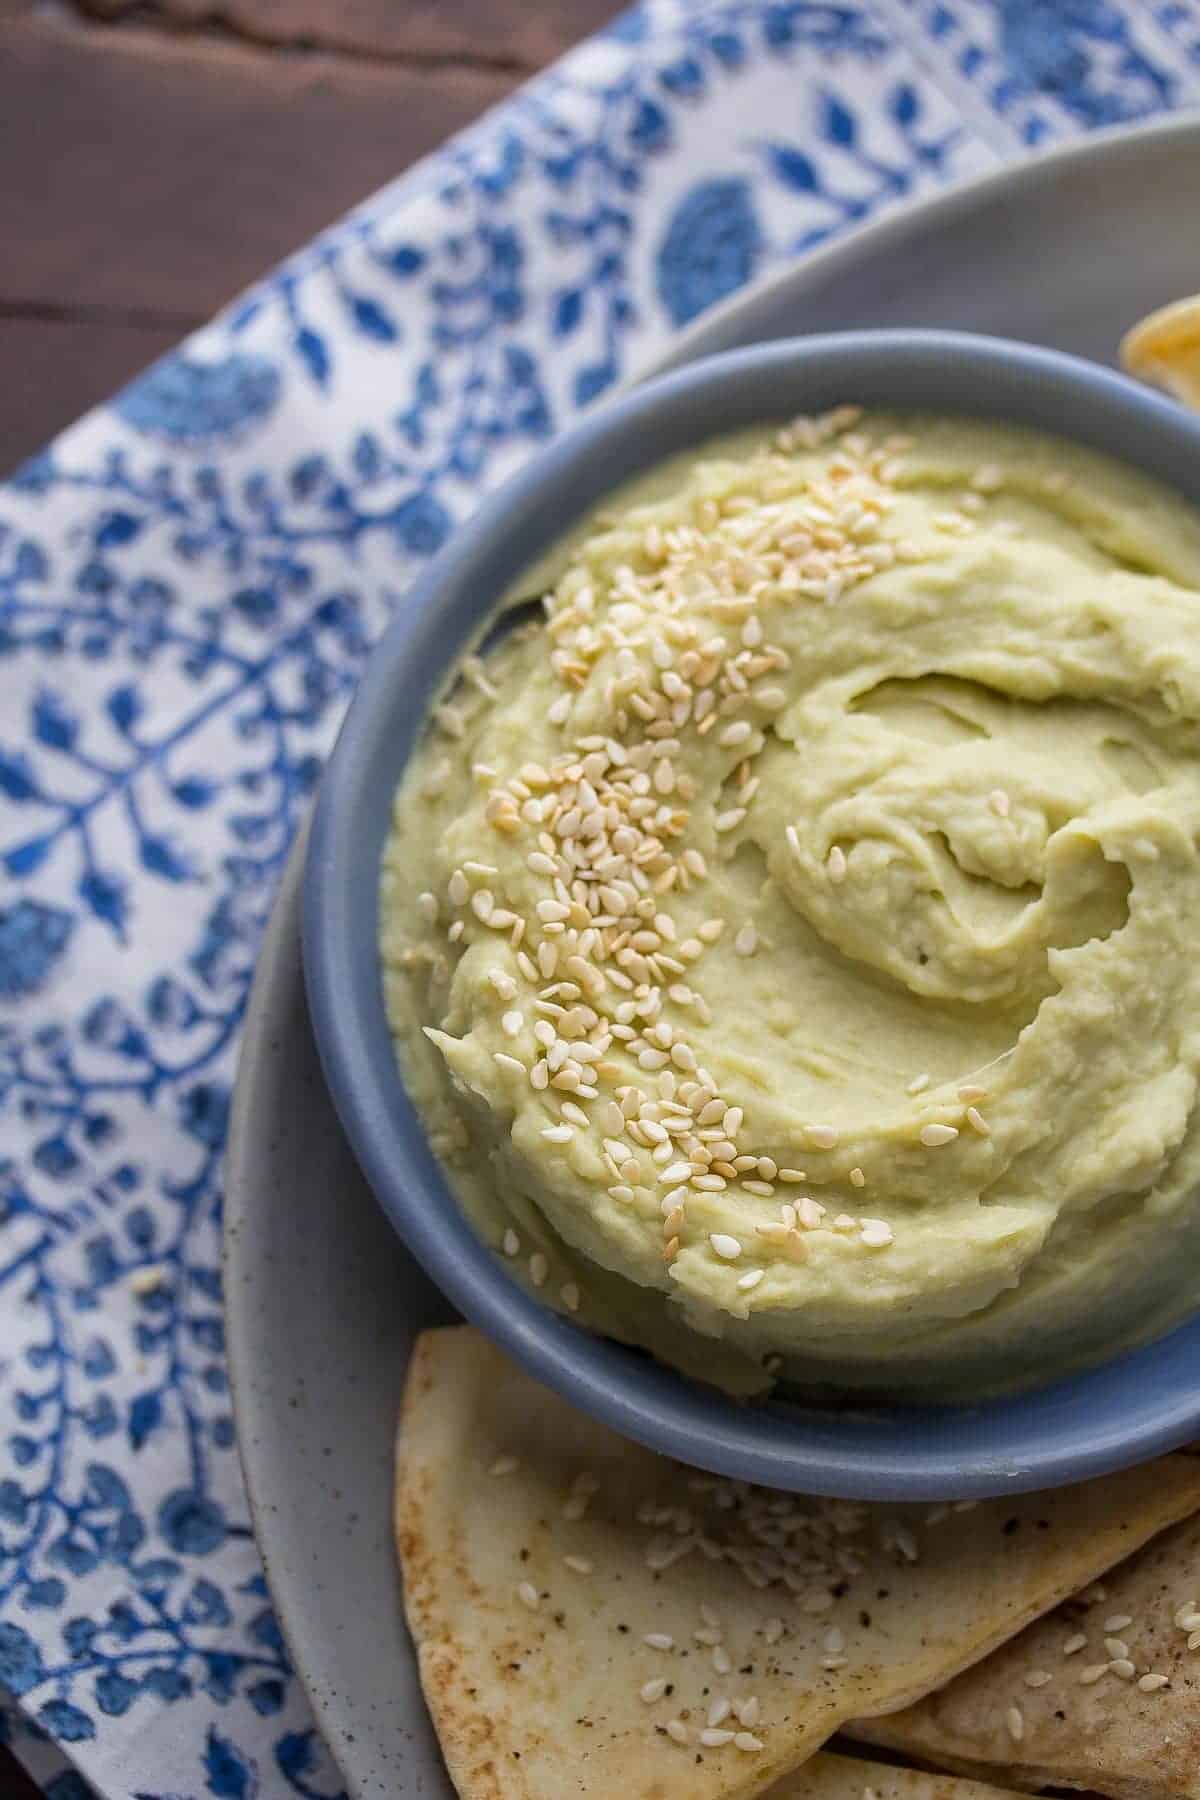 Avocado White Bean Dip with Wasabi and Ginger